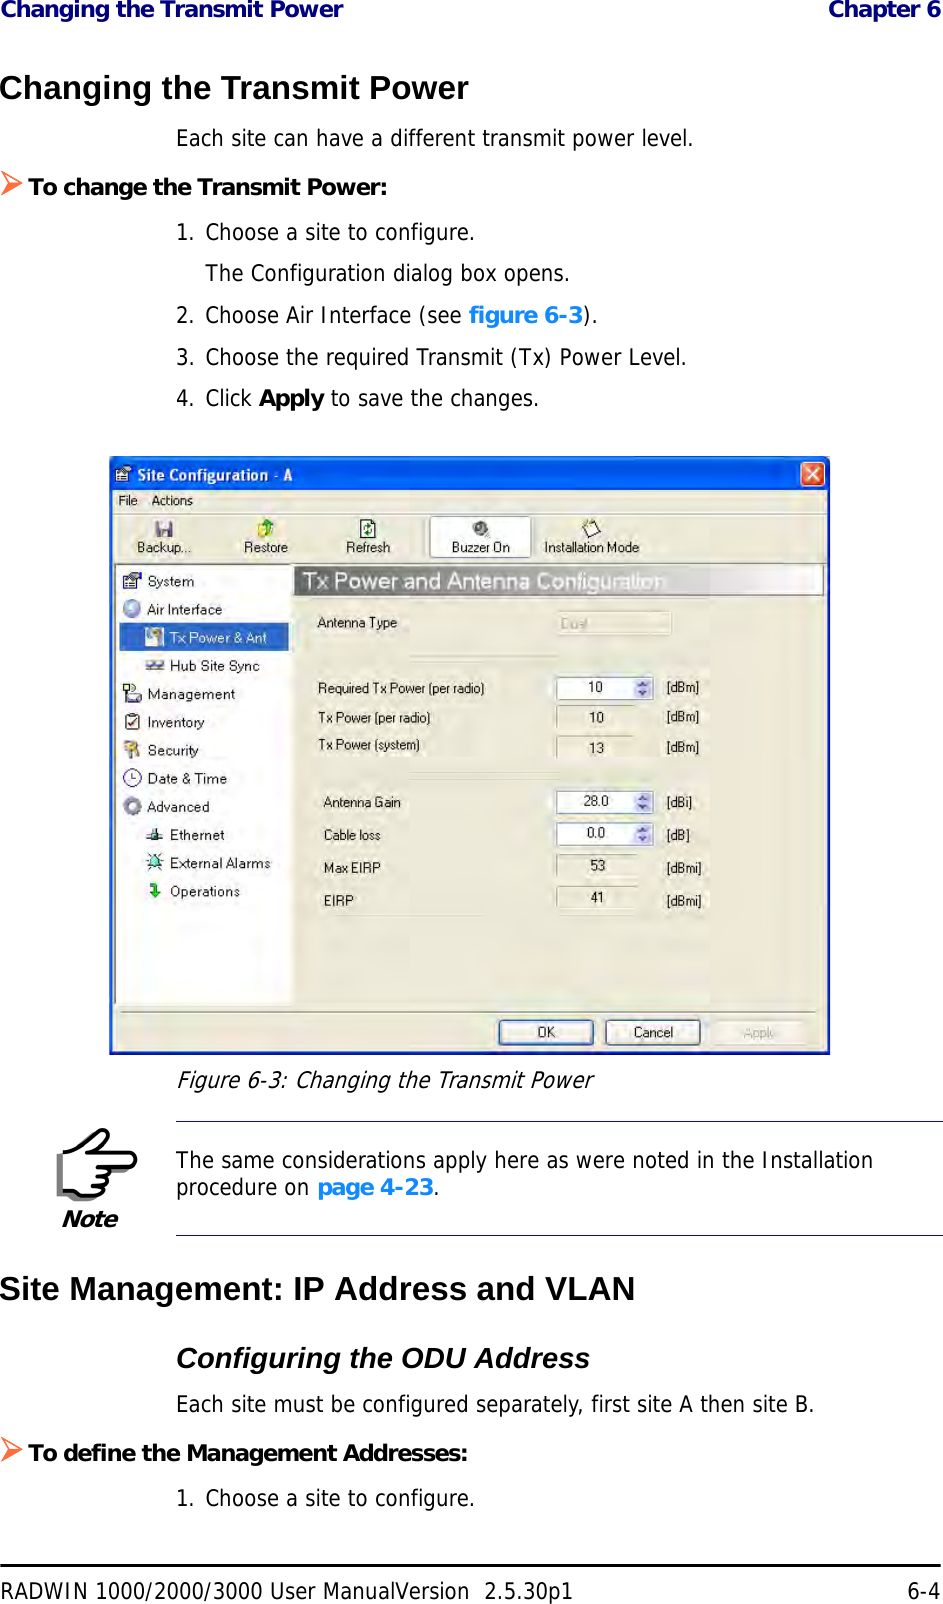 Changing the Transmit Power  Chapter 6RADWIN 1000/2000/3000 User ManualVersion  2.5.30p1 6-4Changing the Transmit PowerEach site can have a different transmit power level. ¾To change the Transmit Power:1. Choose a site to configure.The Configuration dialog box opens.2. Choose Air Interface (see figure 6-3).3. Choose the required Transmit (Tx) Power Level.4. Click Apply to save the changes.Figure 6-3: Changing the Transmit PowerSite Management: IP Address and VLANConfiguring the ODU AddressEach site must be configured separately, first site A then site B.¾To define the Management Addresses:1. Choose a site to configure.NoteThe same considerations apply here as were noted in the Installation procedure on page 4-23.